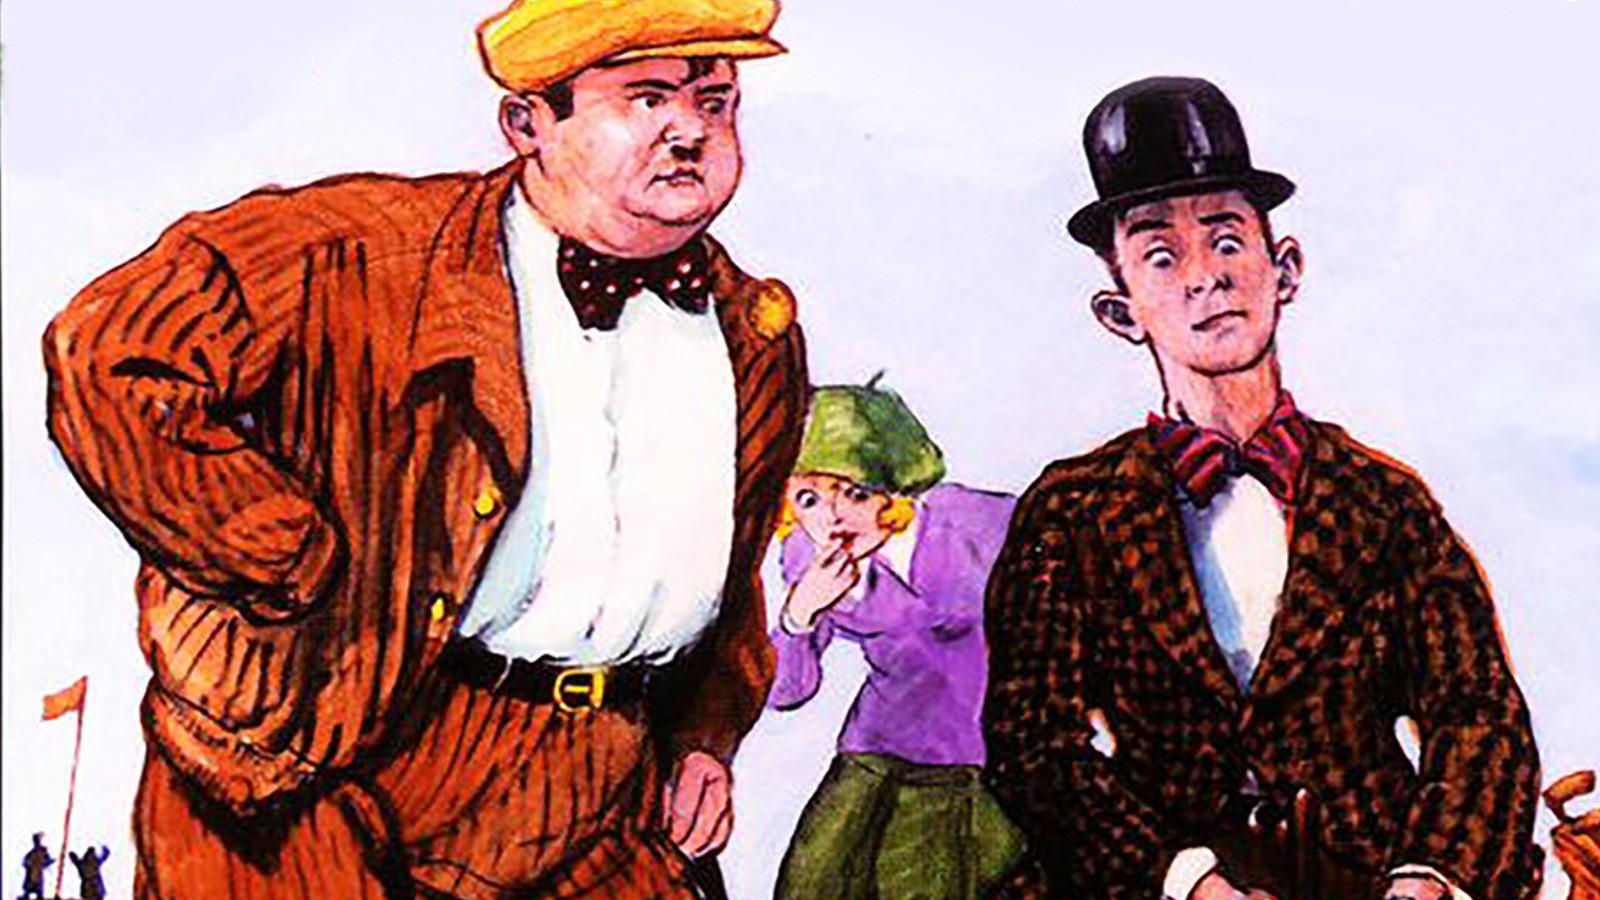 Laurel and Hardy in Should Married Men Go Home?